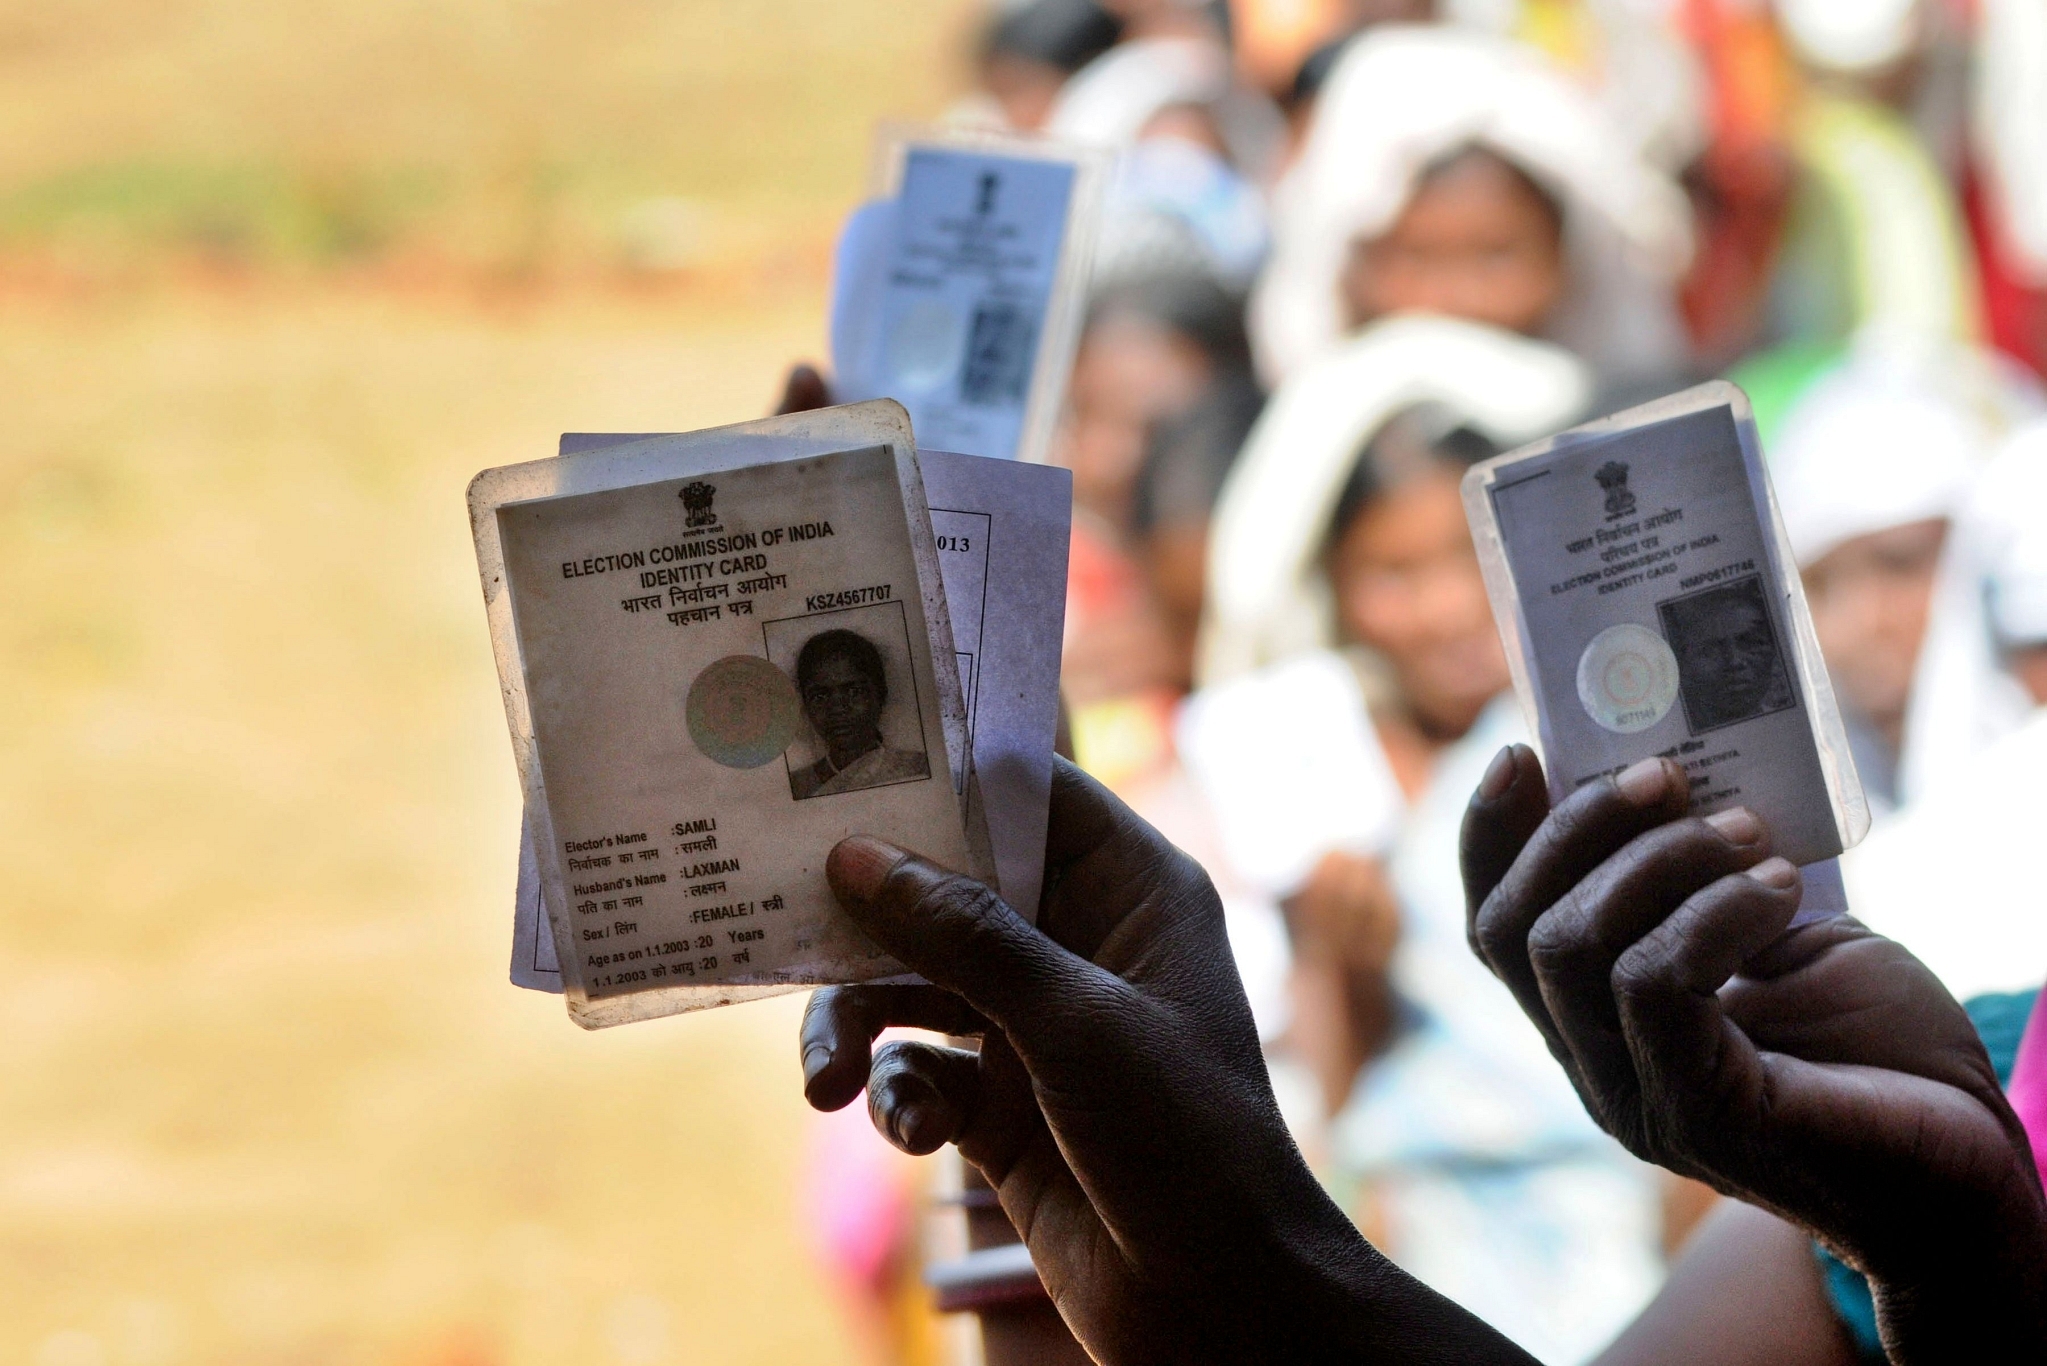 Voters showing voter ID card while standing in queue to cast their vote - Represenative Image (Parwaz Khan/Hindustan Times via GettyImages)